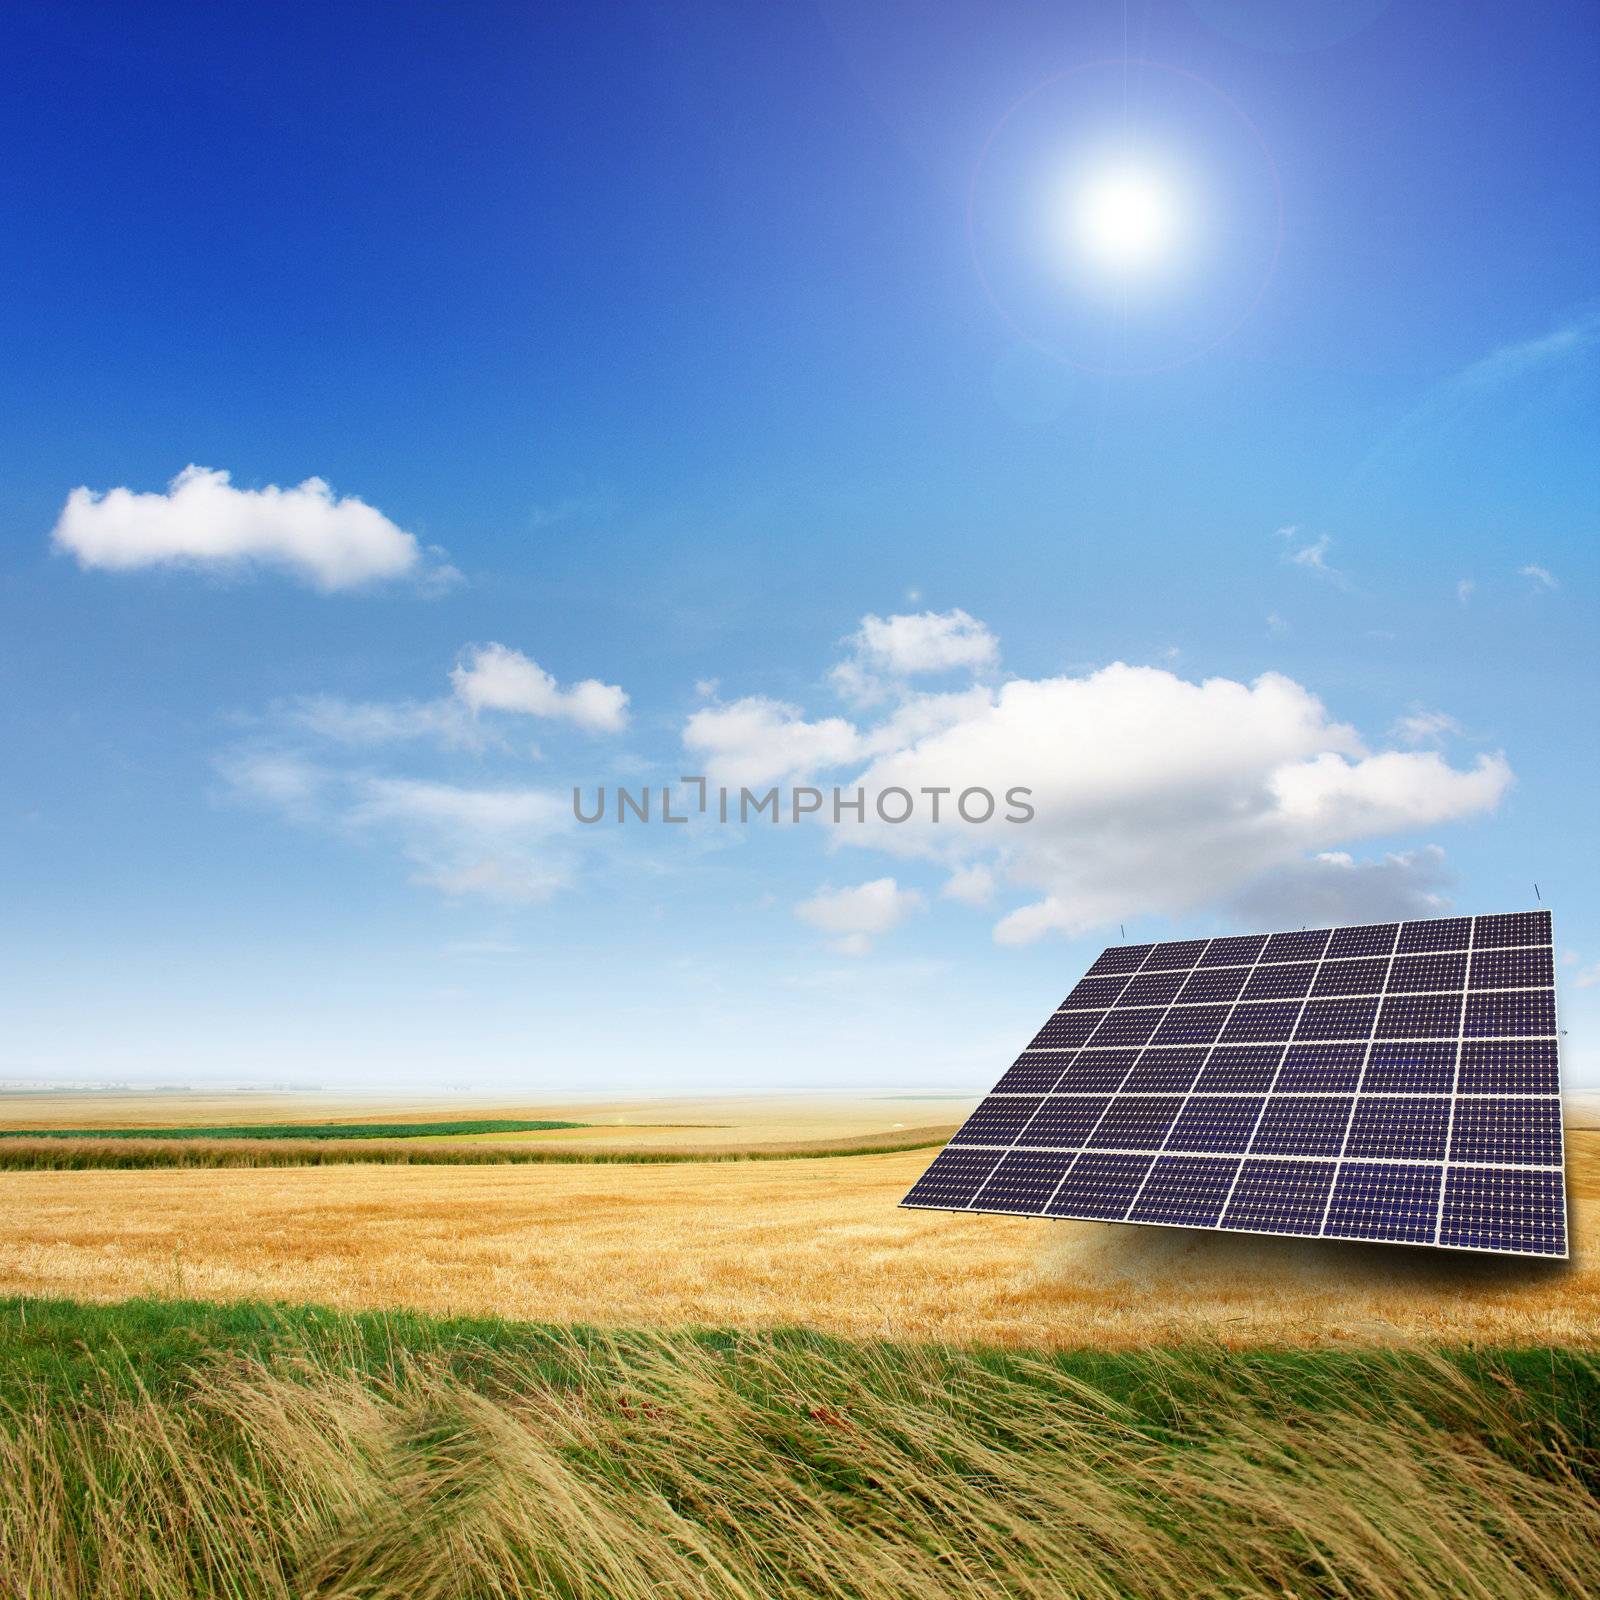 Solar panels generate electricity on a sunny day